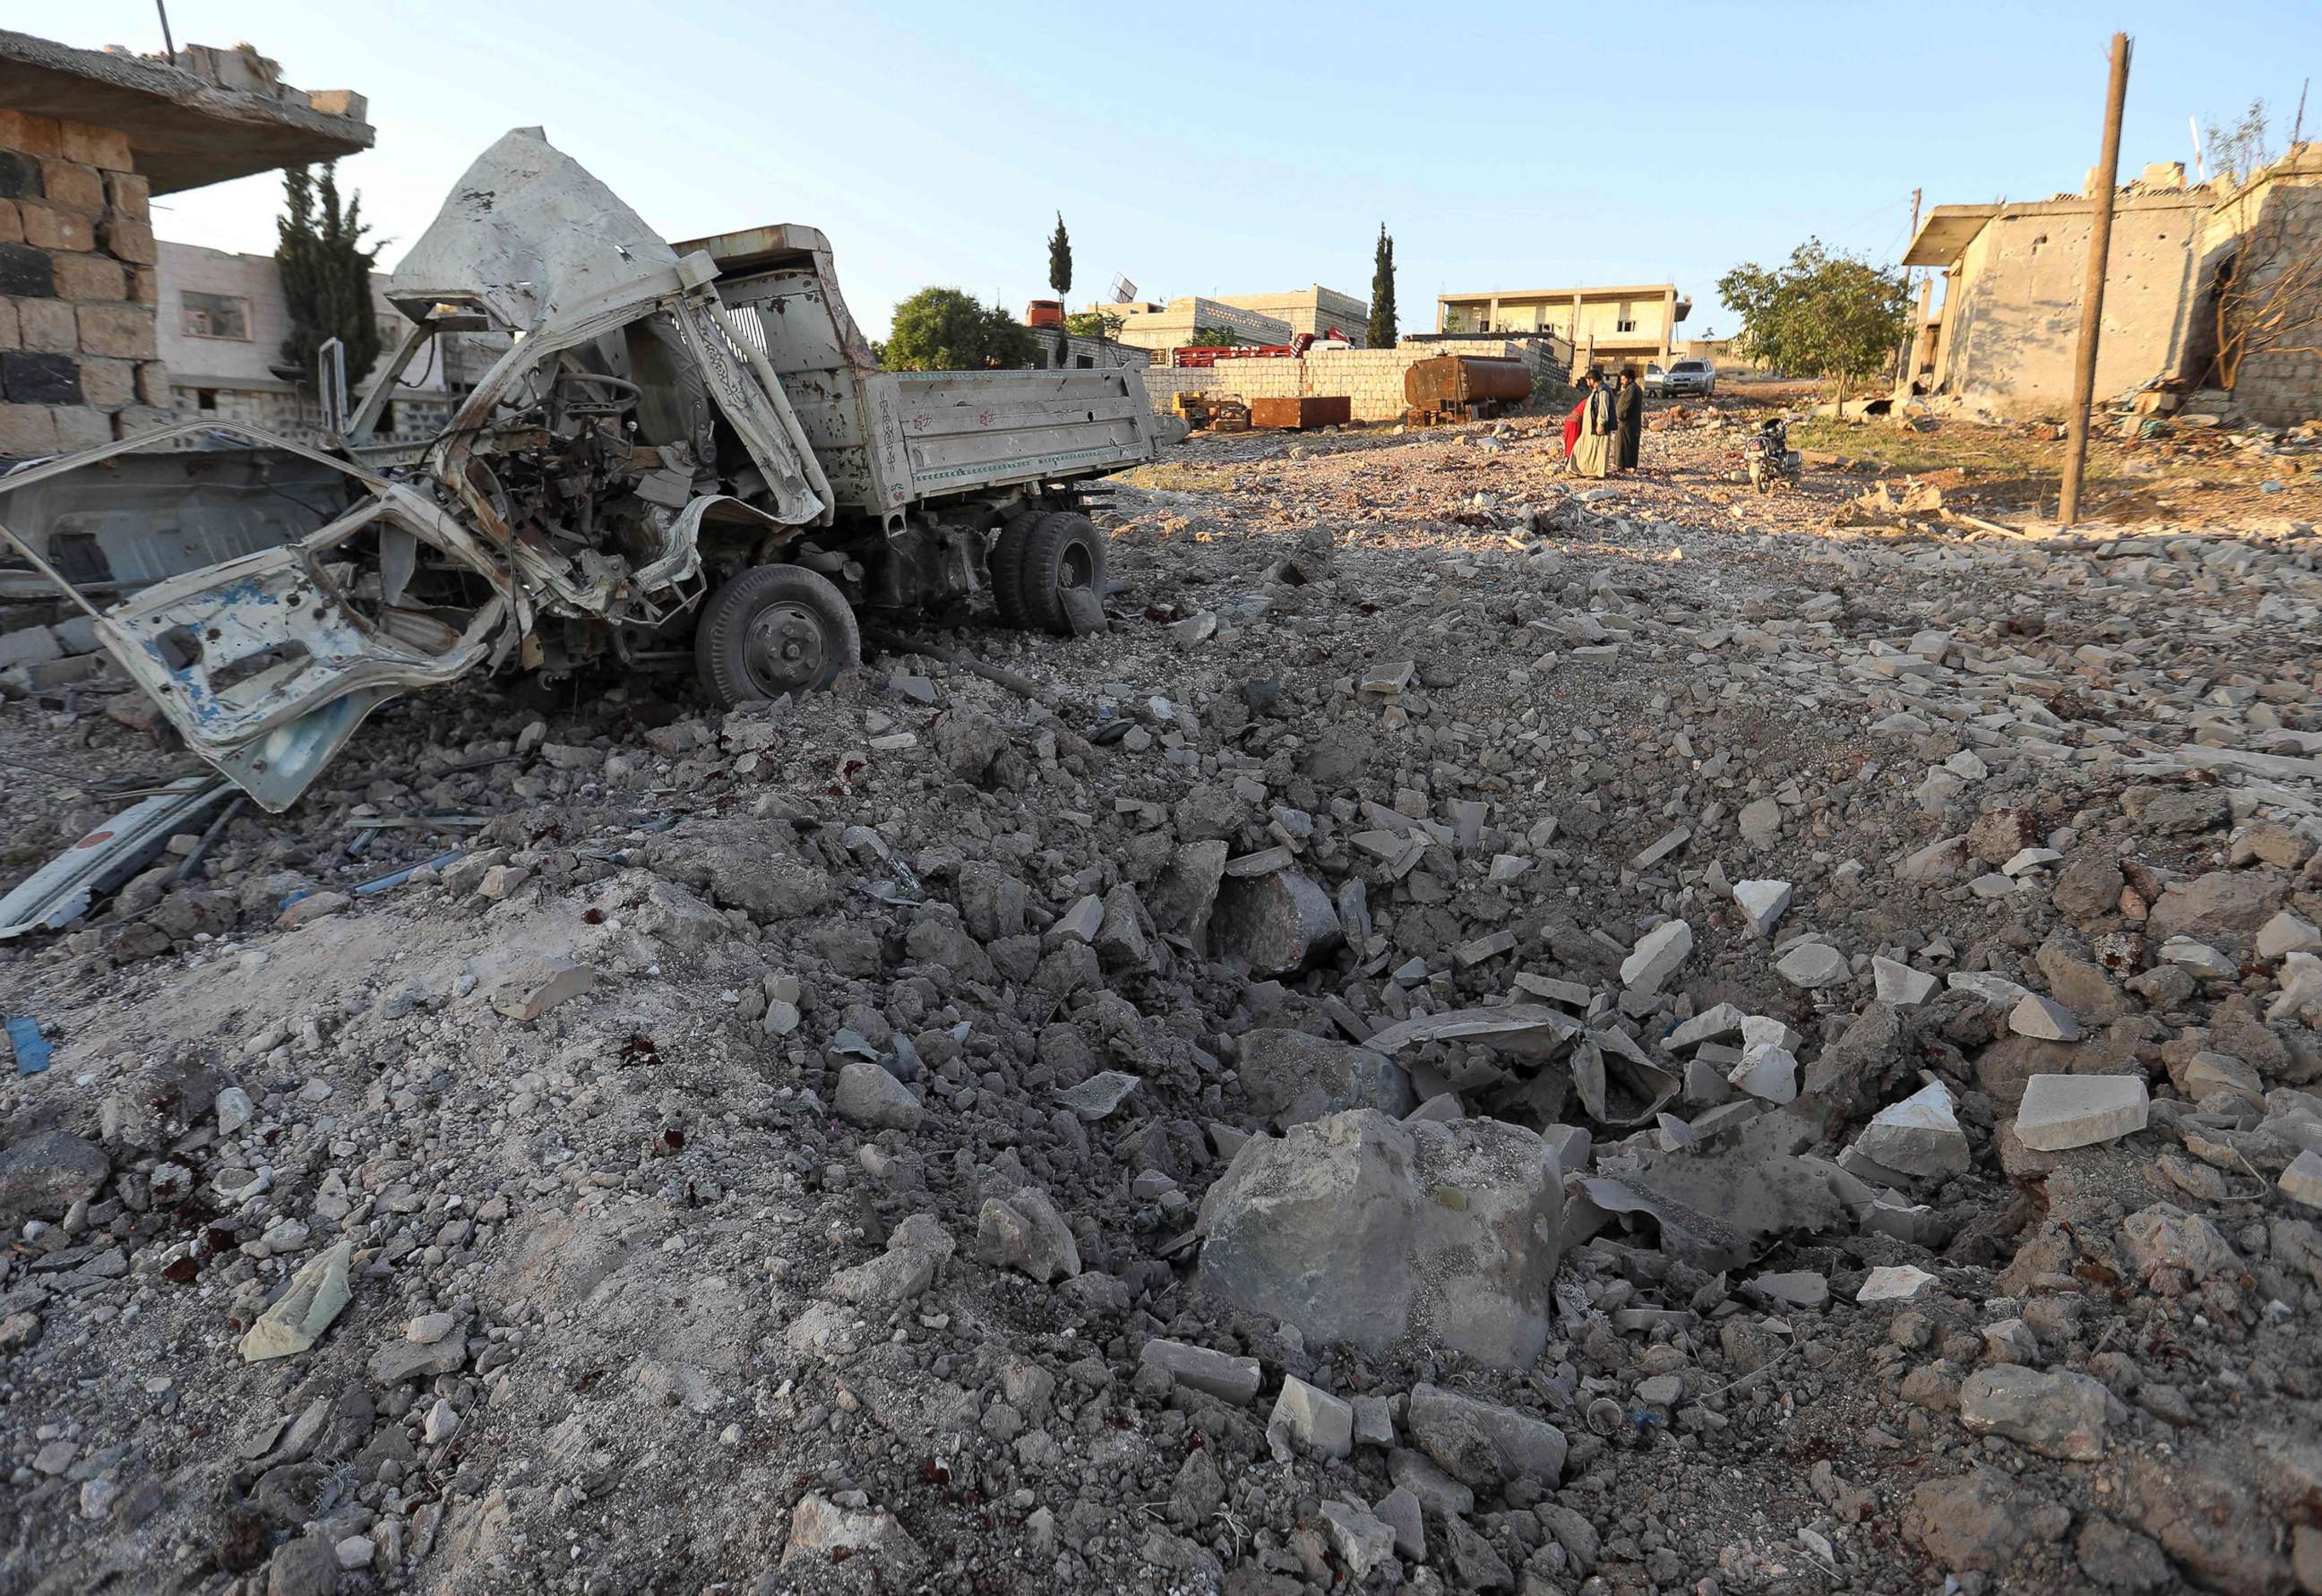 PHOTO: A damaged vehicle lies next to a crater cased by reported airstrikes by the Syrian regime ally Russia, in the town of Kafranbel in the rebel-held part of the Syrian Idlib province on May 20, 2019.